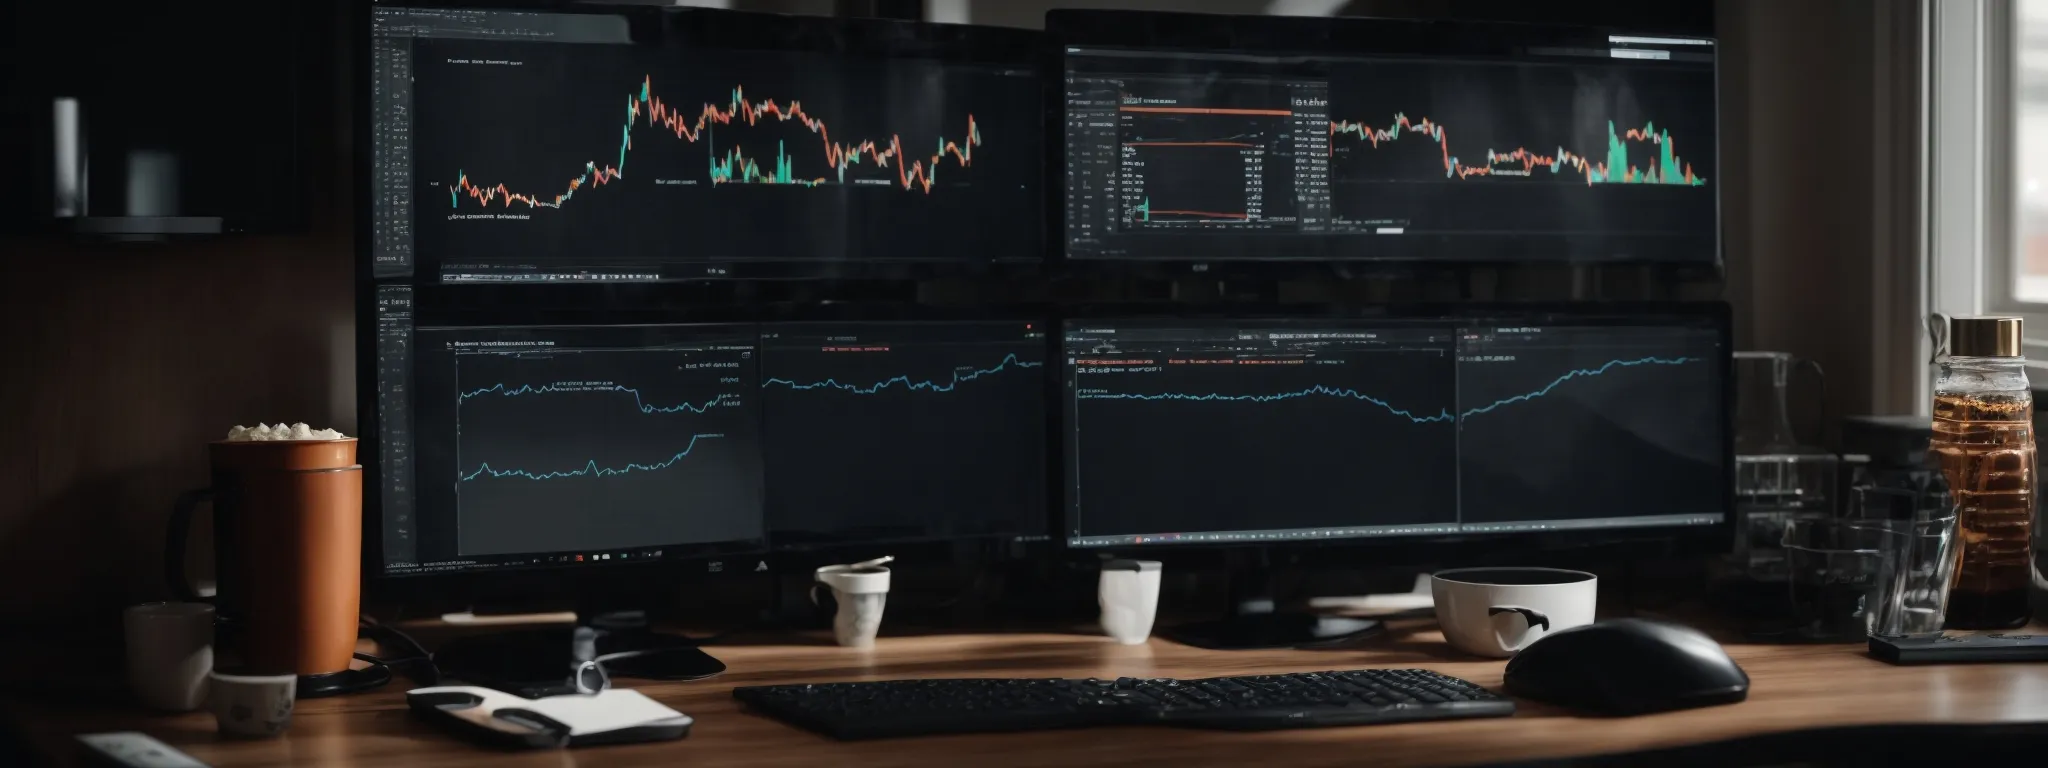 a desktop with dual computer monitors displaying graphs and website analytics, alongside a coffee mug and a notebook.